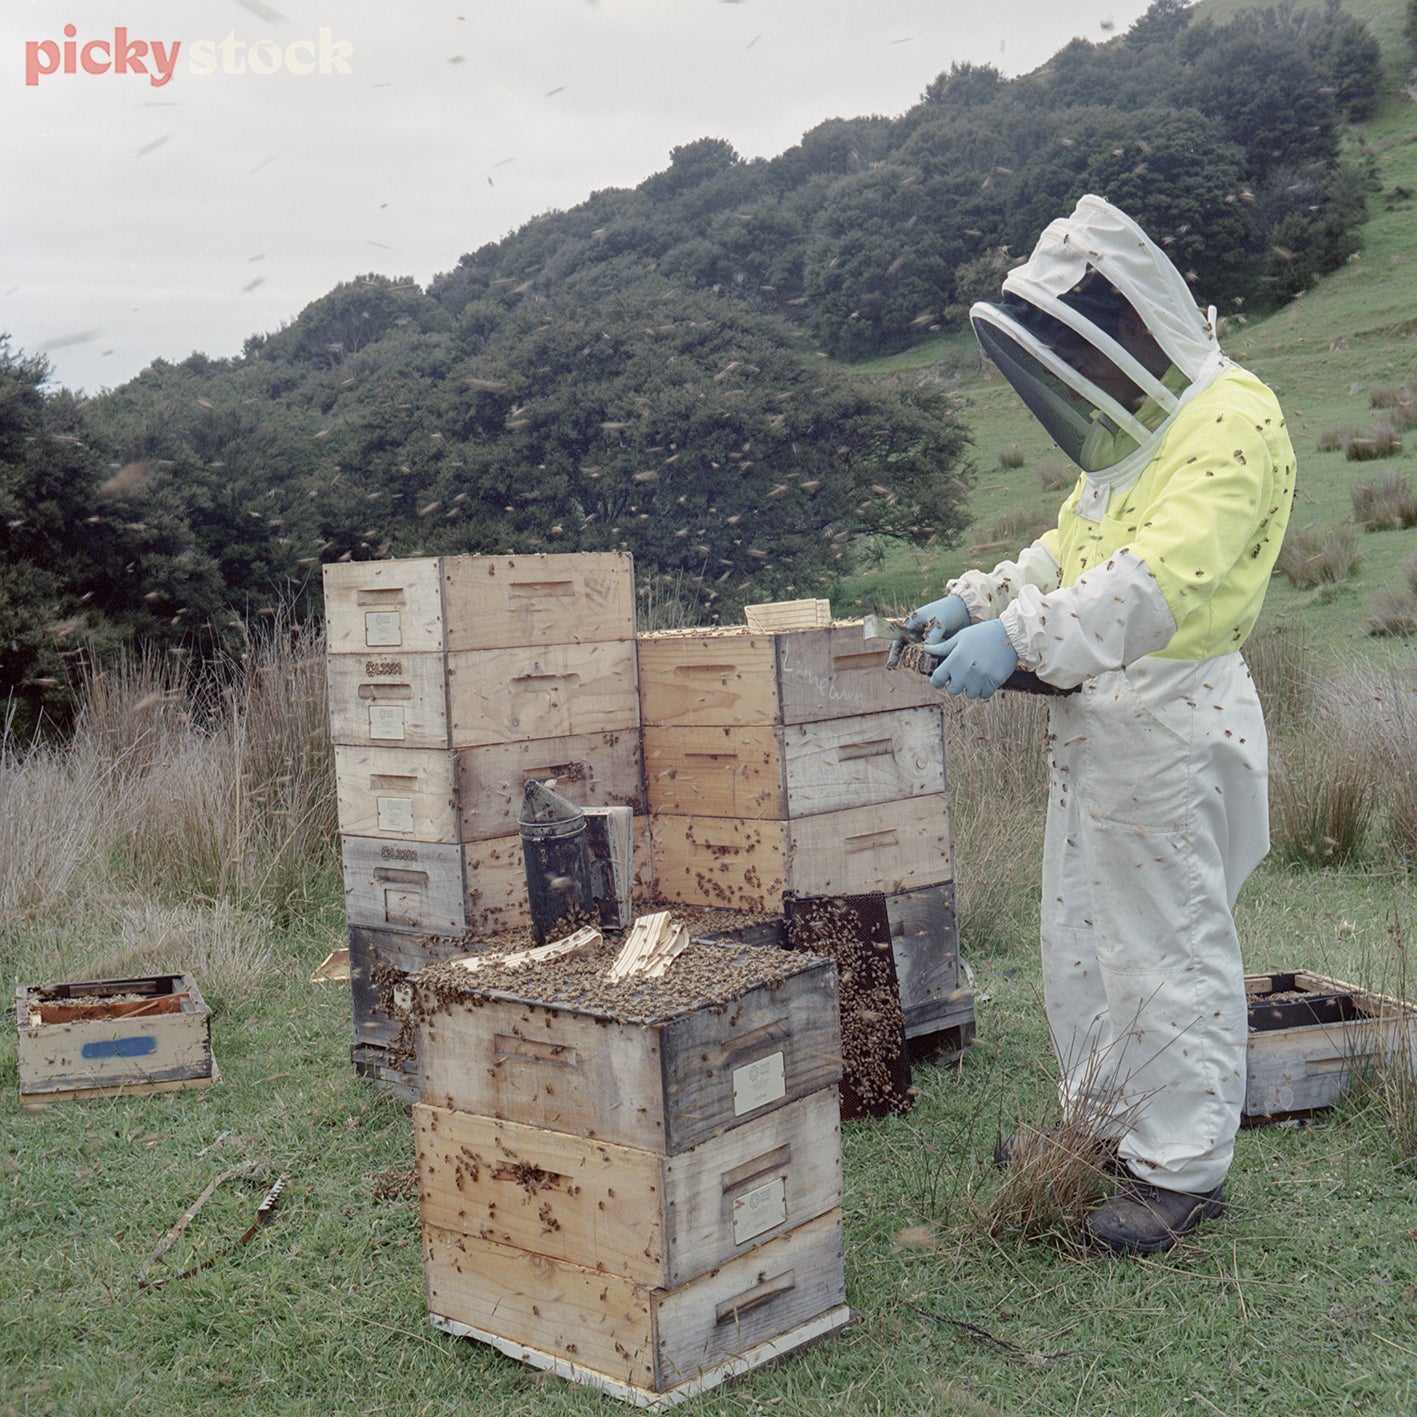 Single beekeeper in full protective gear and blue gloves inspective a row of hives. holding a working tool in their hand and part of the hive. Background is of a rural setting with a large hill and bush. 